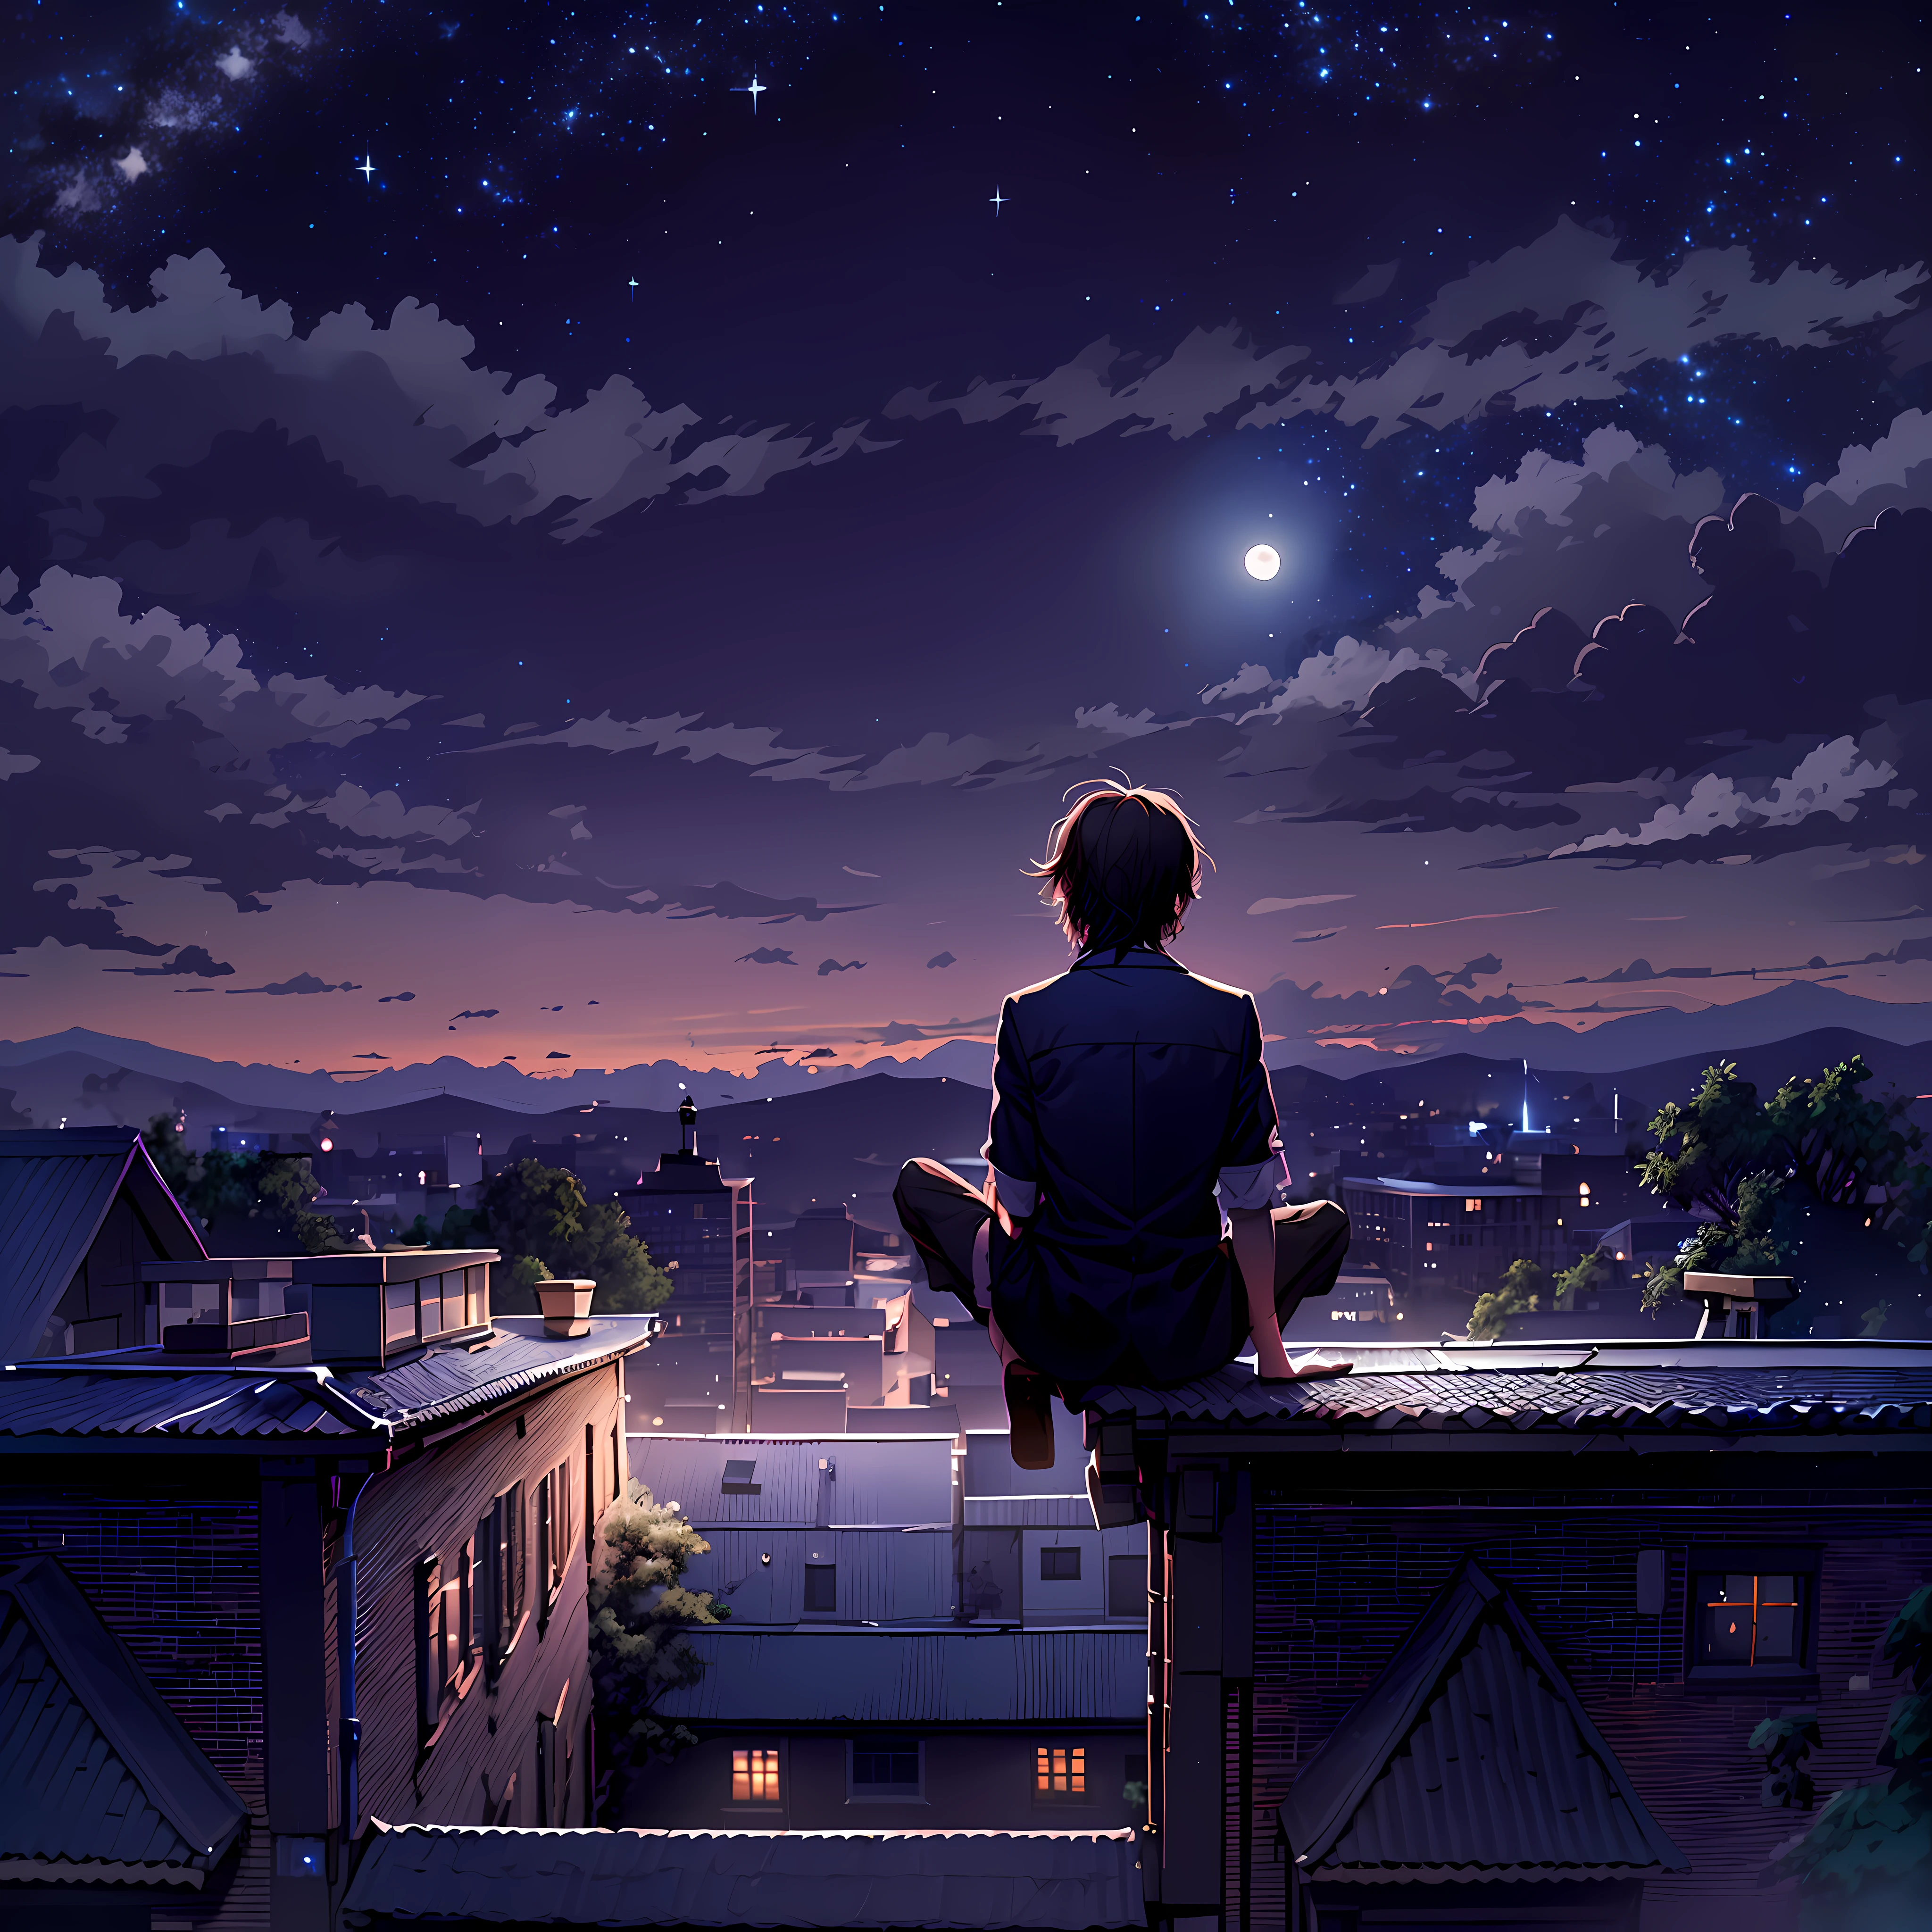 Backview of a doctor boy sitting in the top of a roof. octans, sky, star (sky), scenery, starry sky, night, night sky, solo, outdoors, building, cloud, milky way, sitting, tree, long hair, city, silhouette, cityscape. There are stars moon milky way in the sky.